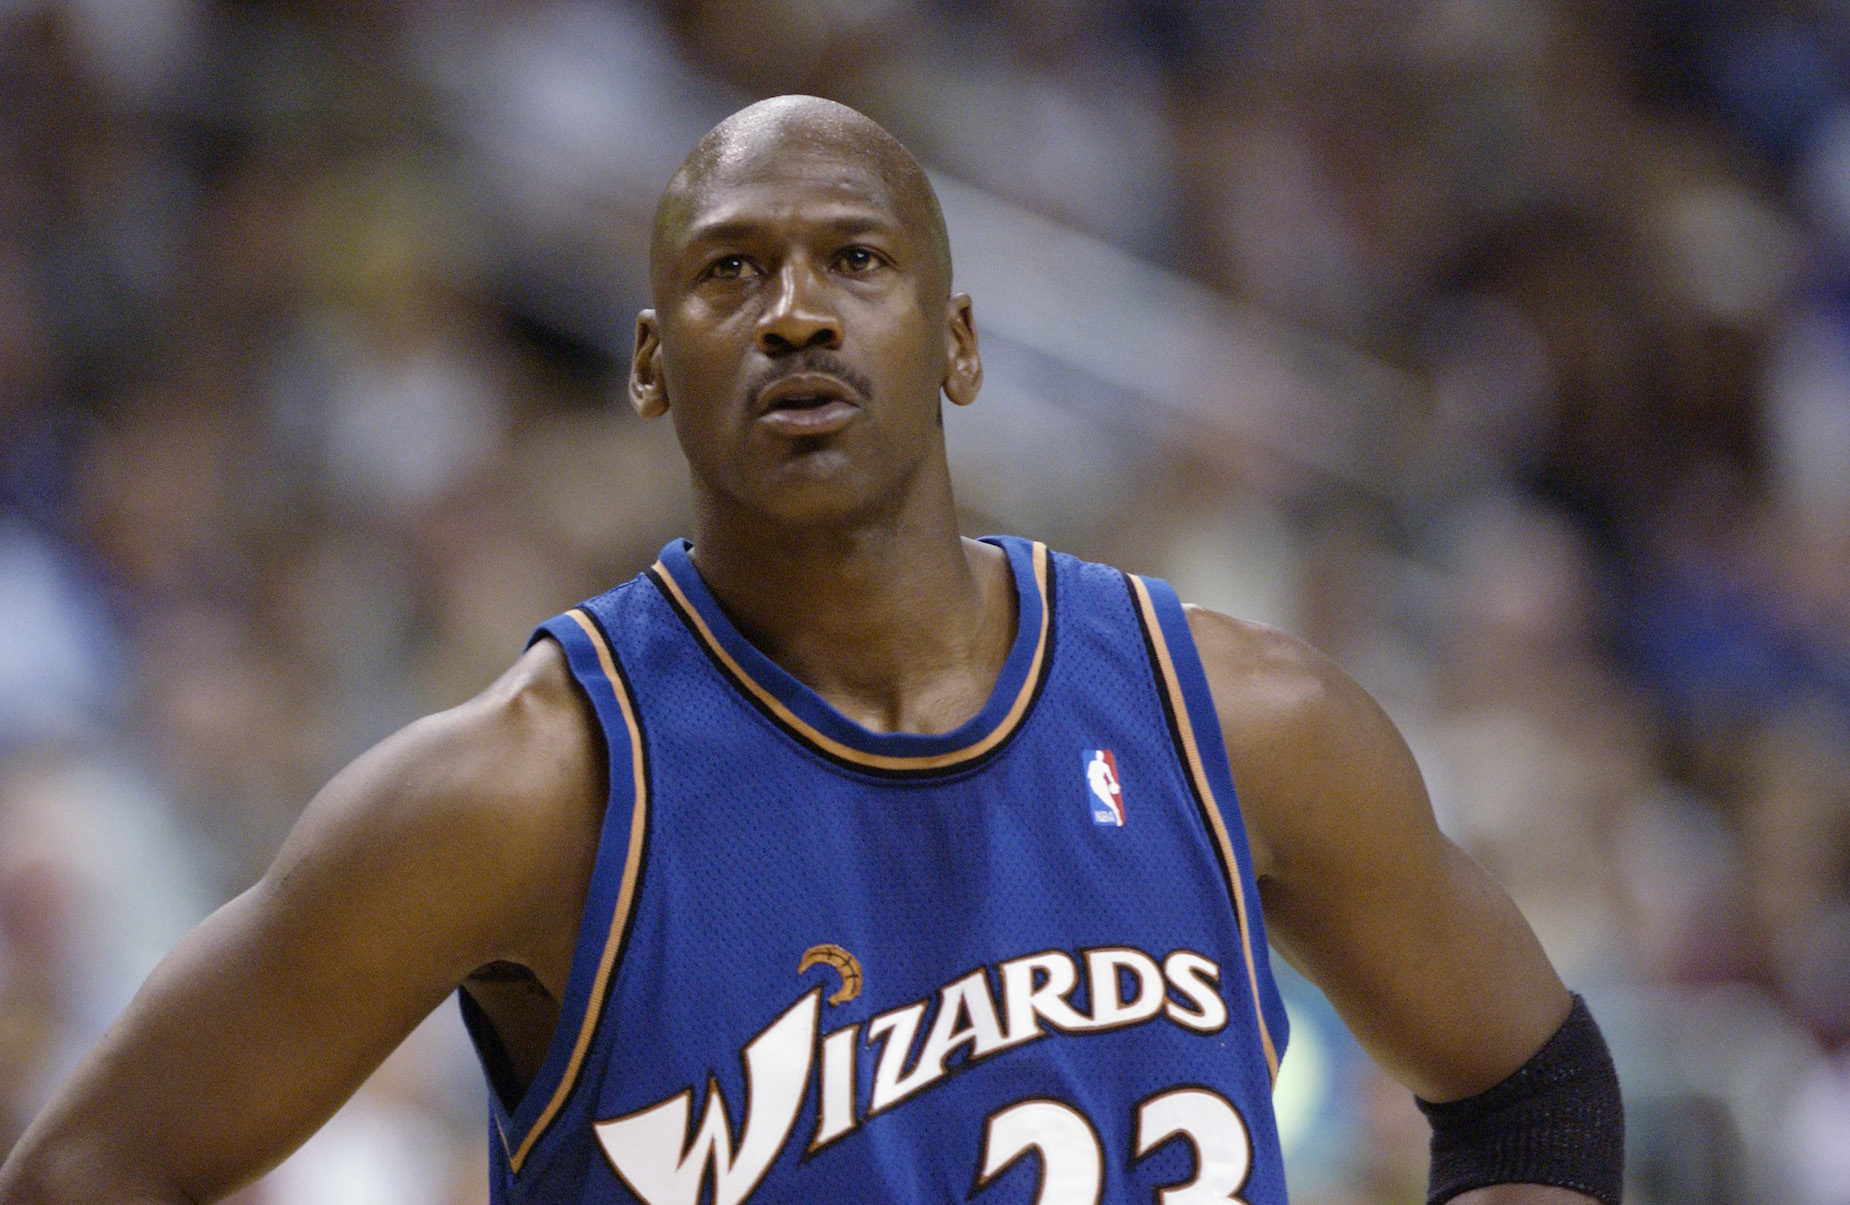 Michael Jordan wasn't the greatest teammate during his time with the Washington Wizards.